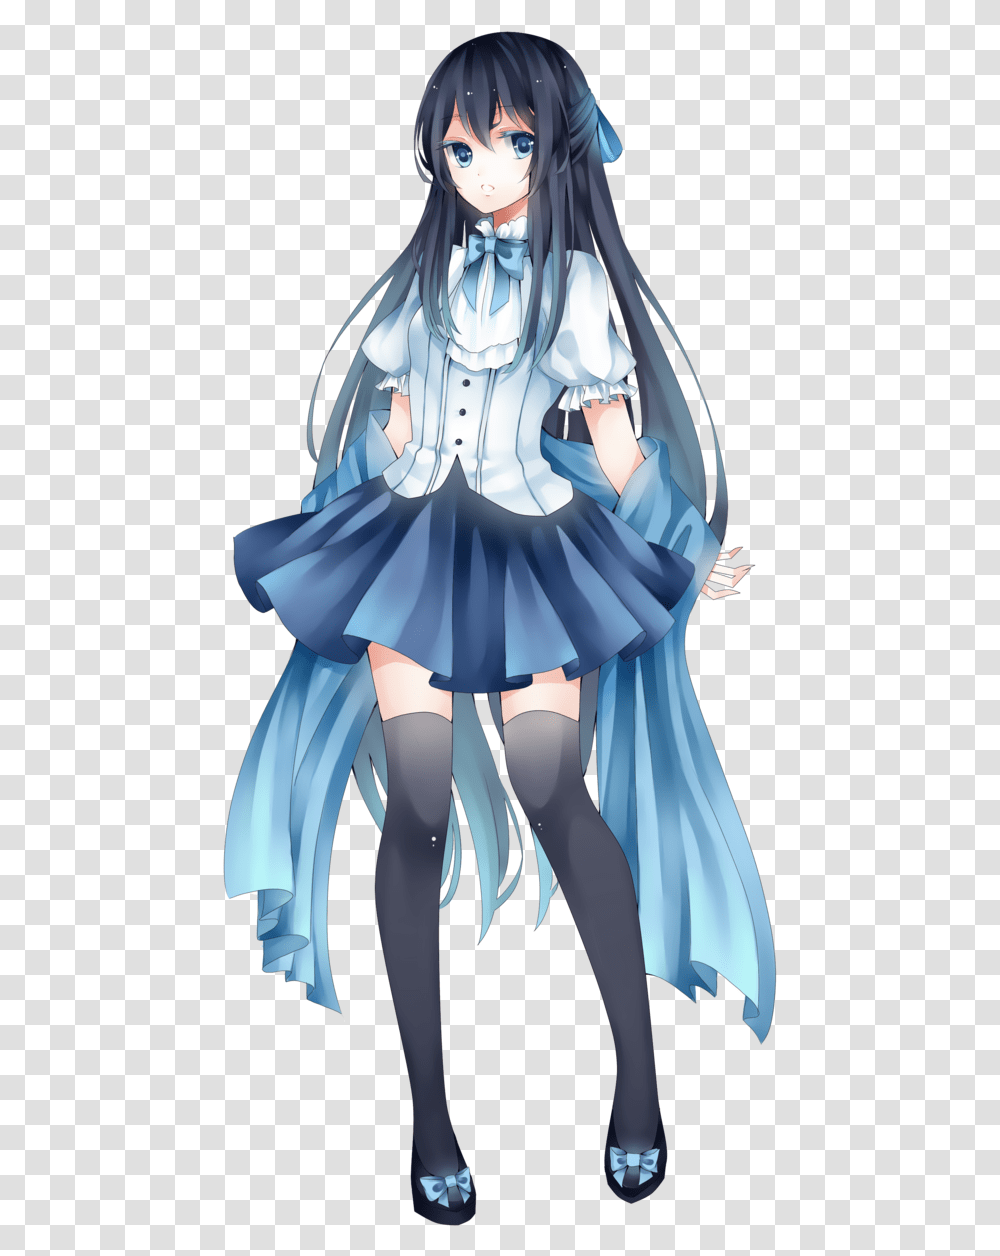 Anime Girl Images Background Copy Anime Girl Full Body, Comics, Book, Manga, Doll Transparent Png